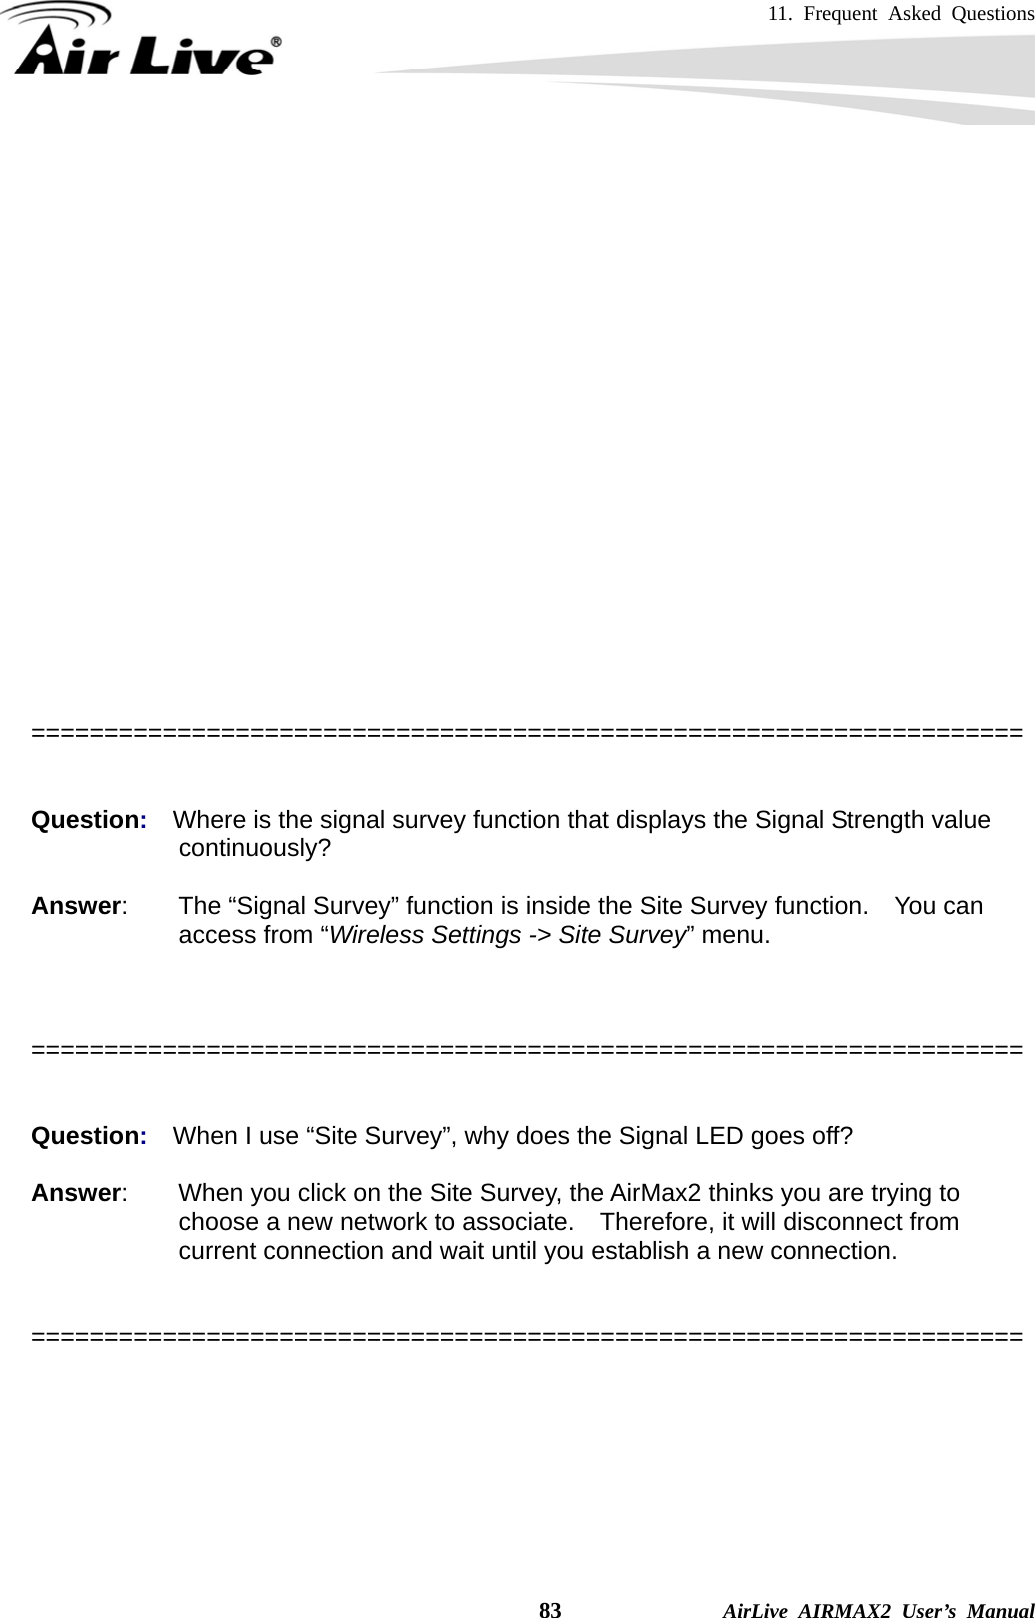 11. Frequent Asked Questions    83              AirLive AIRMAX2 User’s Manual   Please also make sure the antenna (Operation Mode-&gt;Setup-&gt;Advance Settings) is not set to use external antenna.   ====================================================================   Question:  Where is the signal survey function that displays the Signal Strength value continuously?  Answer:        The “Signal Survey” function is inside the Site Survey function.    You can access from “Wireless Settings -&gt; Site Survey” menu.    ====================================================================   Question:  When I use “Site Survey”, why does the Signal LED goes off?  Answer:        When you click on the Site Survey, the AirMax2 thinks you are trying to choose a new network to associate.    Therefore, it will disconnect from current connection and wait until you establish a new connection.     ====================================================================  